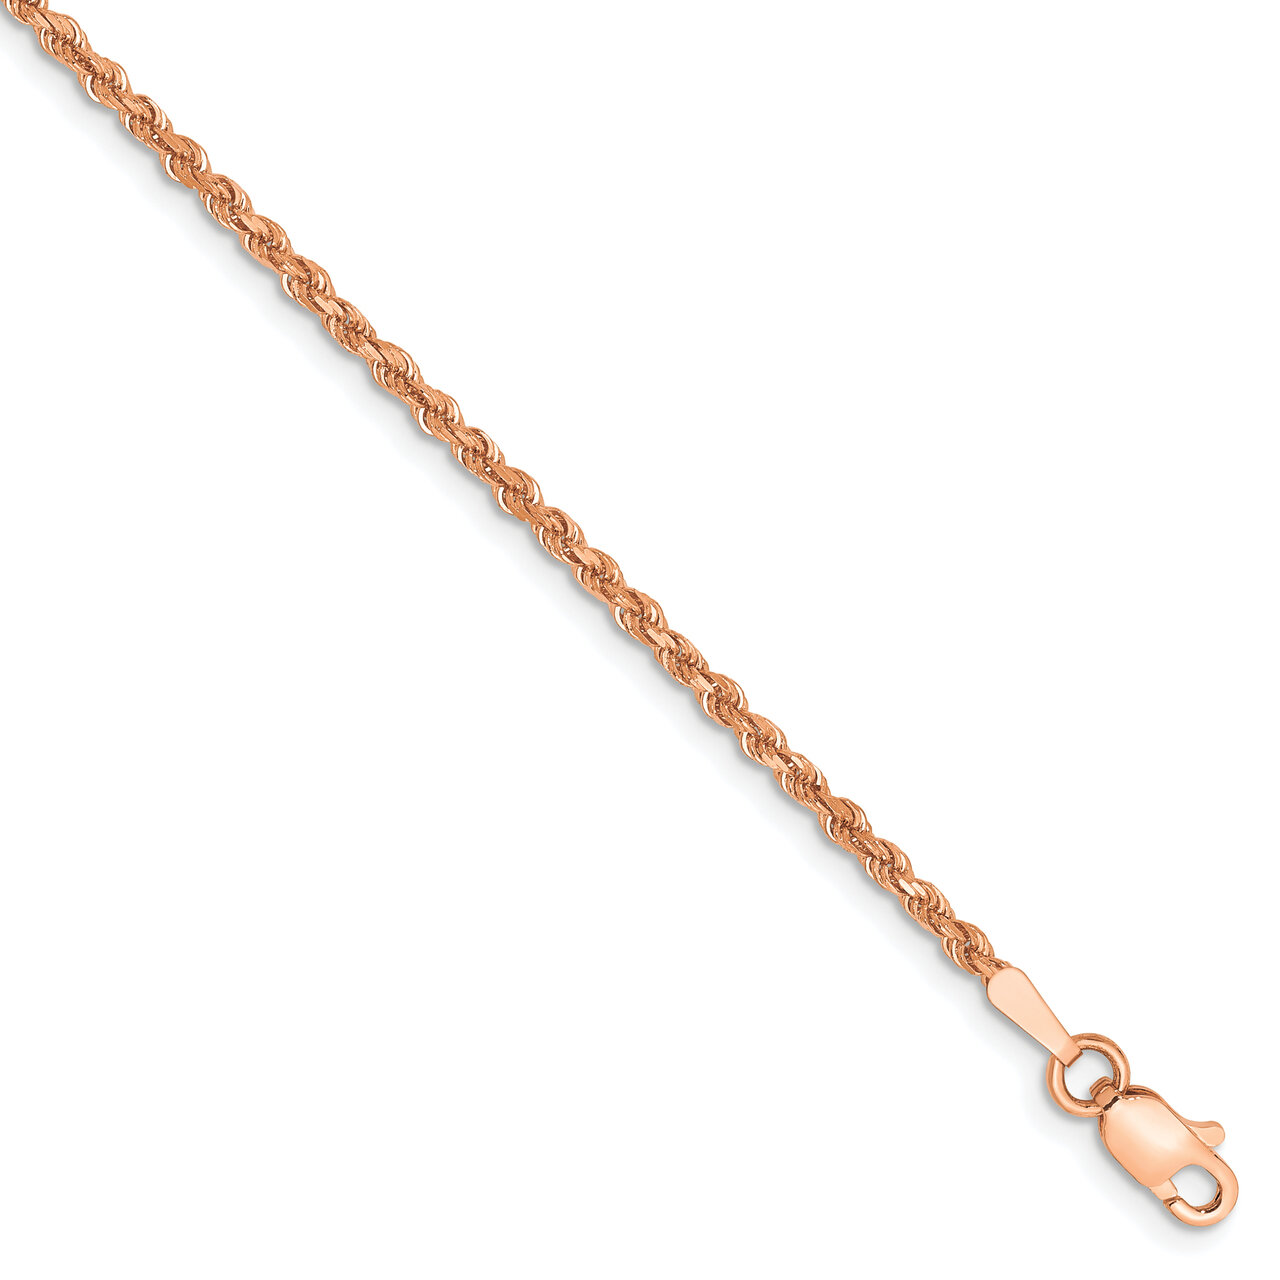 7 Inch 1.75mm Diamond-cut Rope with Lobster Clasp Chain 14k Rose Gold 014R-7